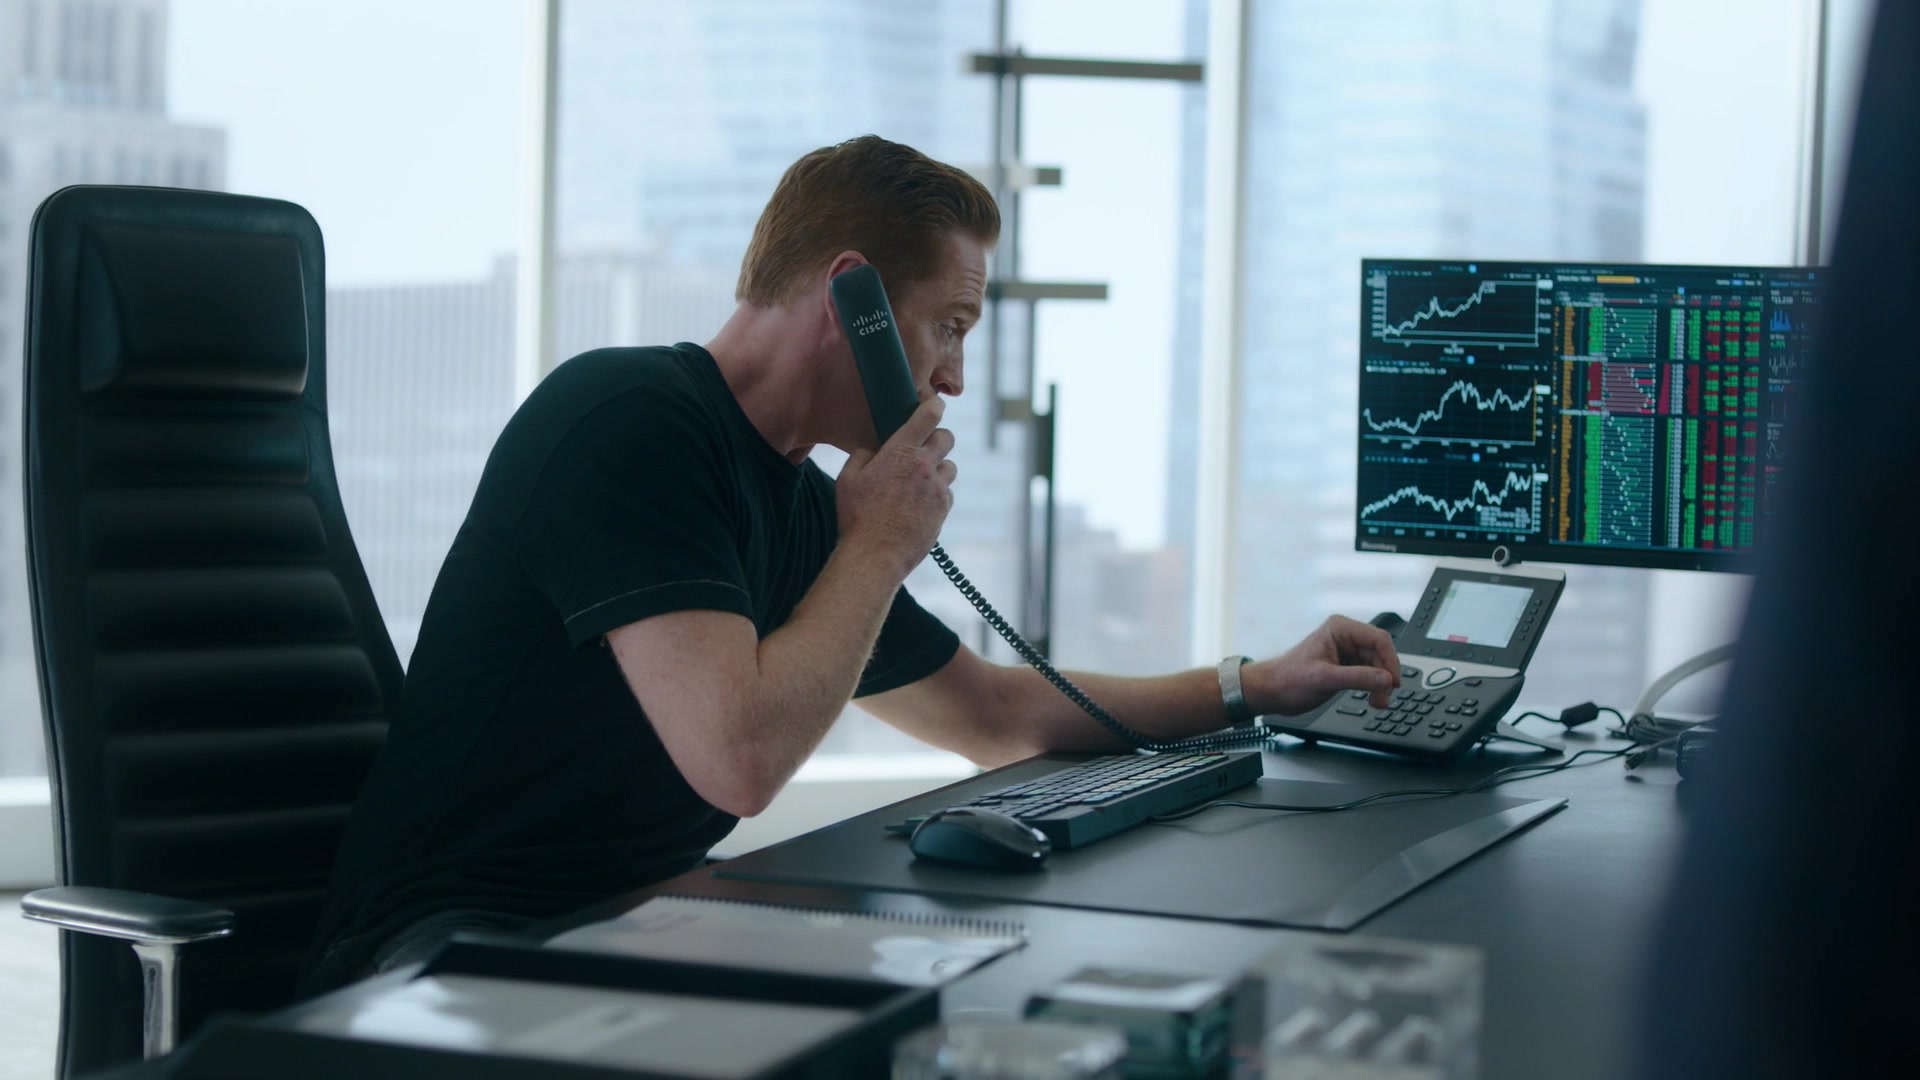 Cisco Telephone Used By Damian Lewis (Bobby Axelrod) In Billions Season 4 Episode 2 “Arousal ” (2019)